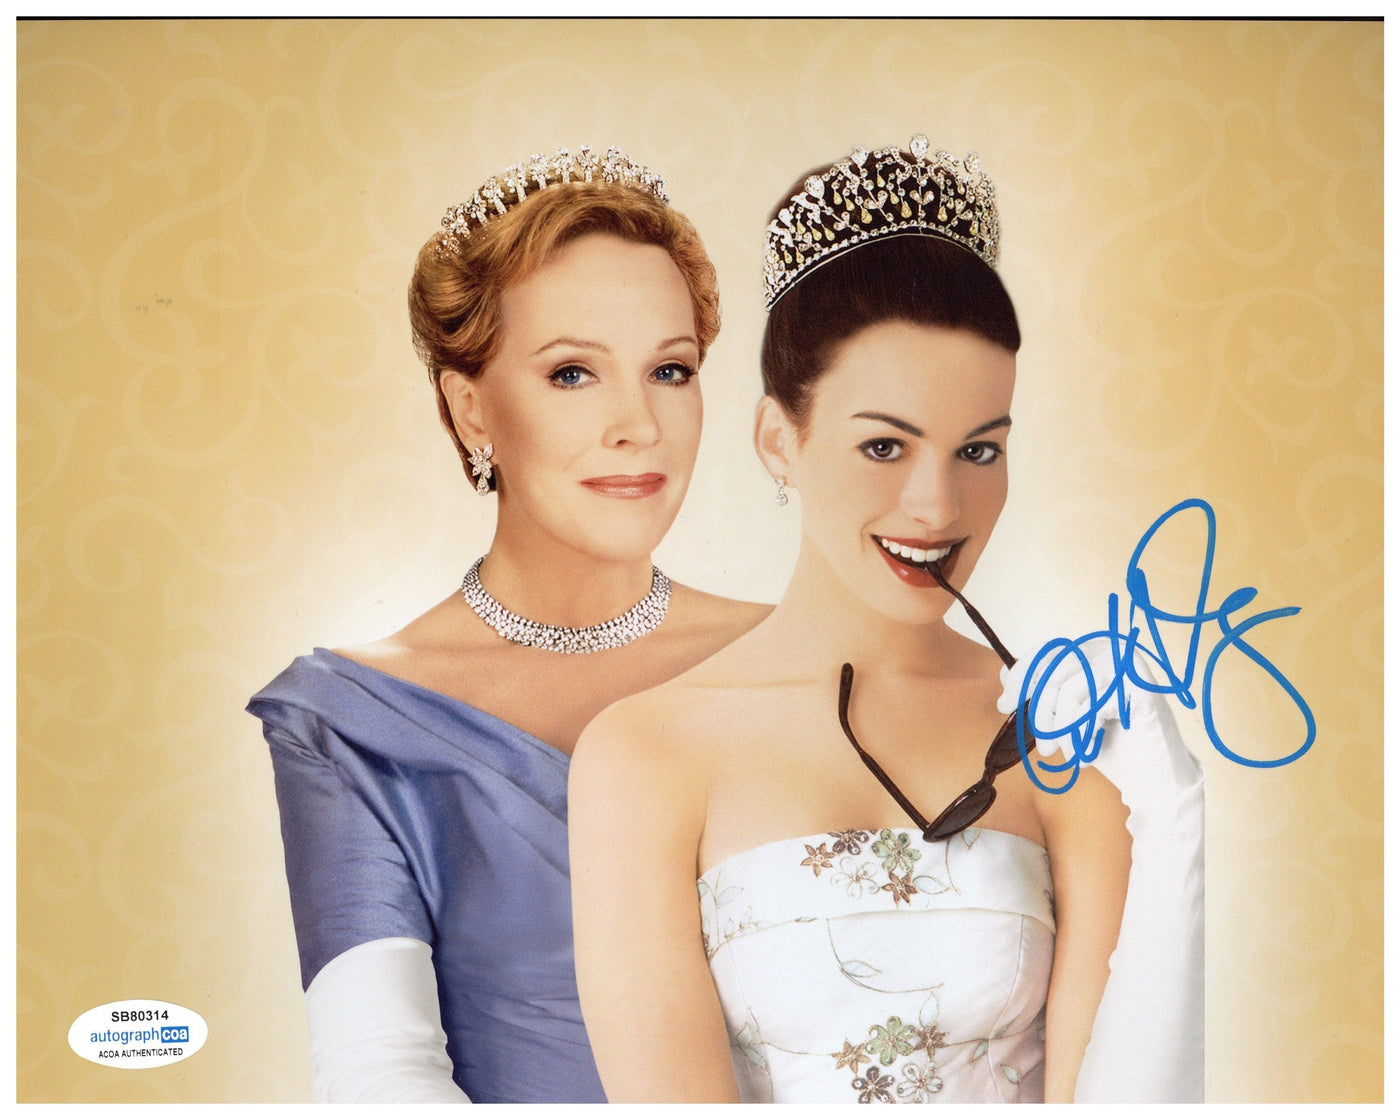 ANNE HATHAWAY SIGNED 8X10 PHOTO THE PRINCESS DIARIES AUTOGRAPHED ACOA 4